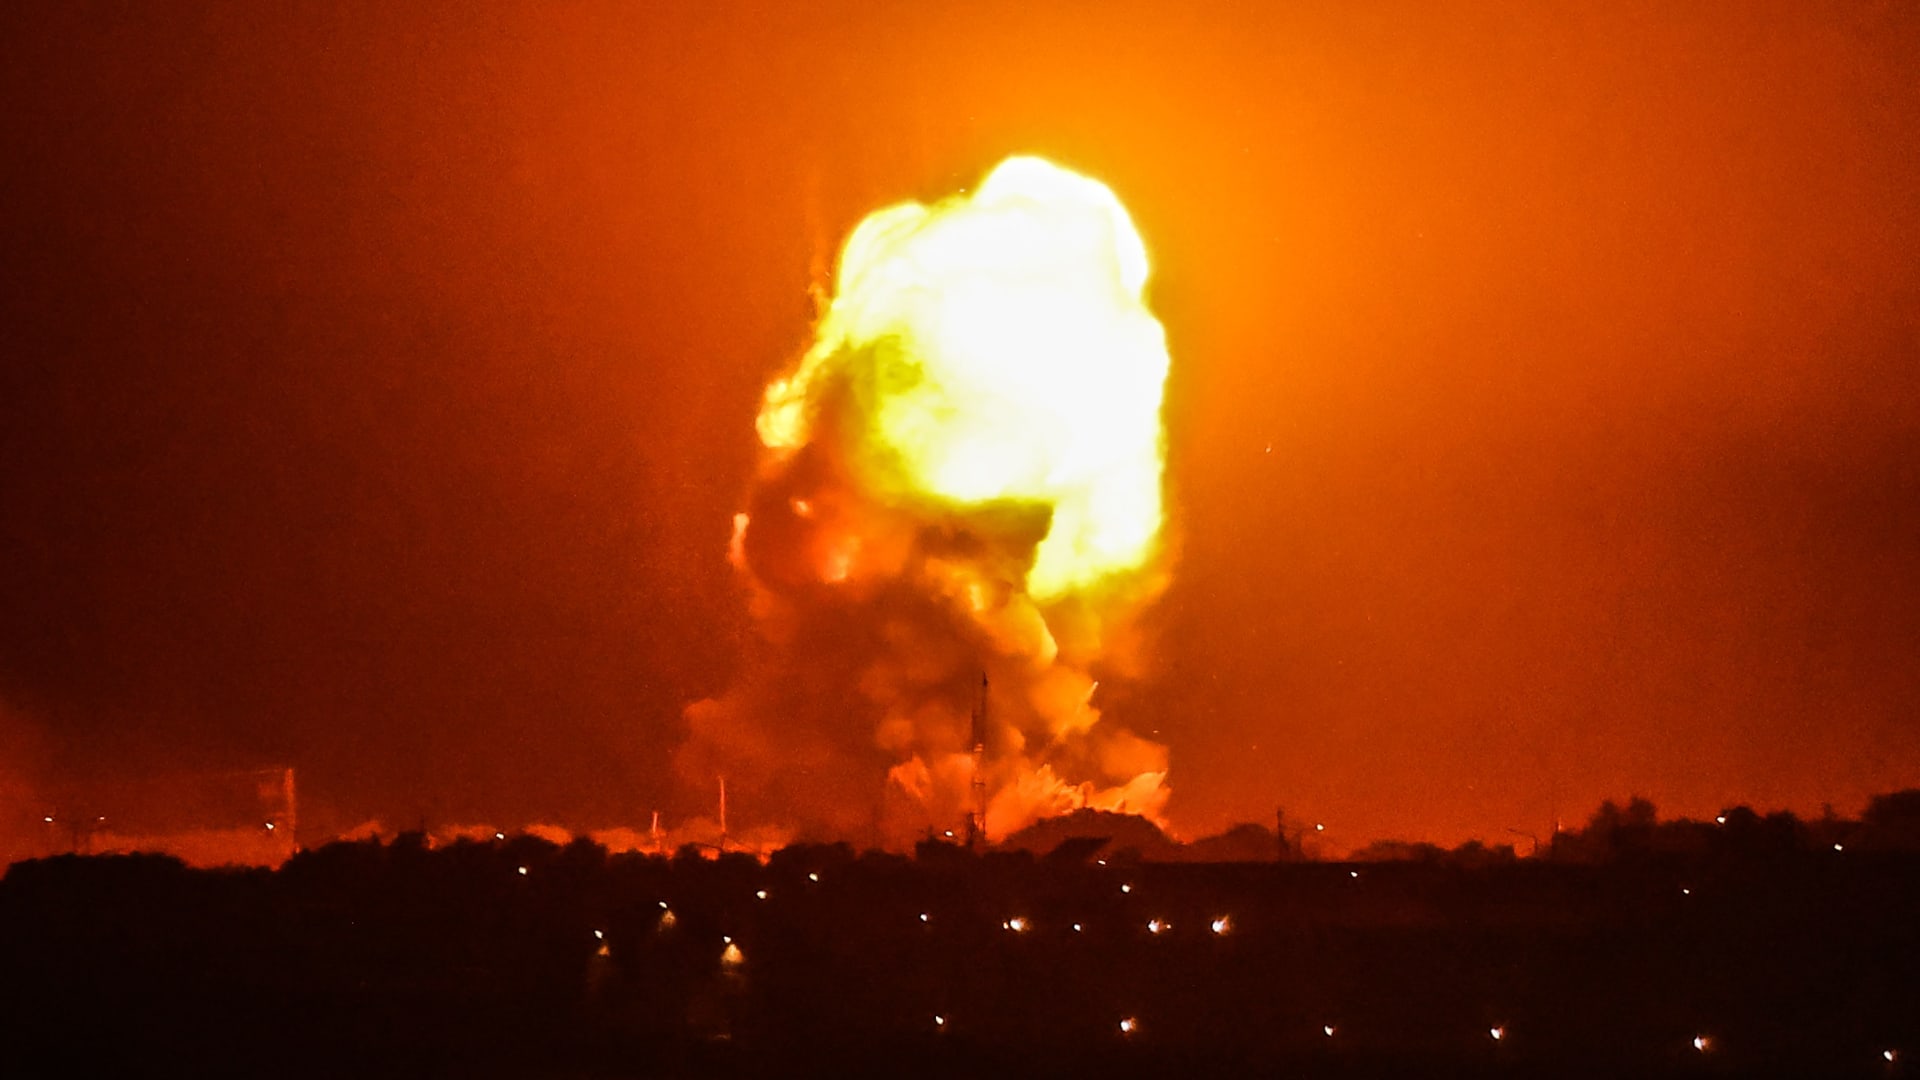 Fire billows from Israeli airstrikes in Rafah, in the southern Gaza Strip, on May 11, 2021. Israel launched deadly air strikes on Gaza on May 10 in response to a barrage of rockets fired by Hamas and other Palestinian militants, amid spiraling violence sparked by unrest at Jerusalem's Al-Aqsa Mosque compound.